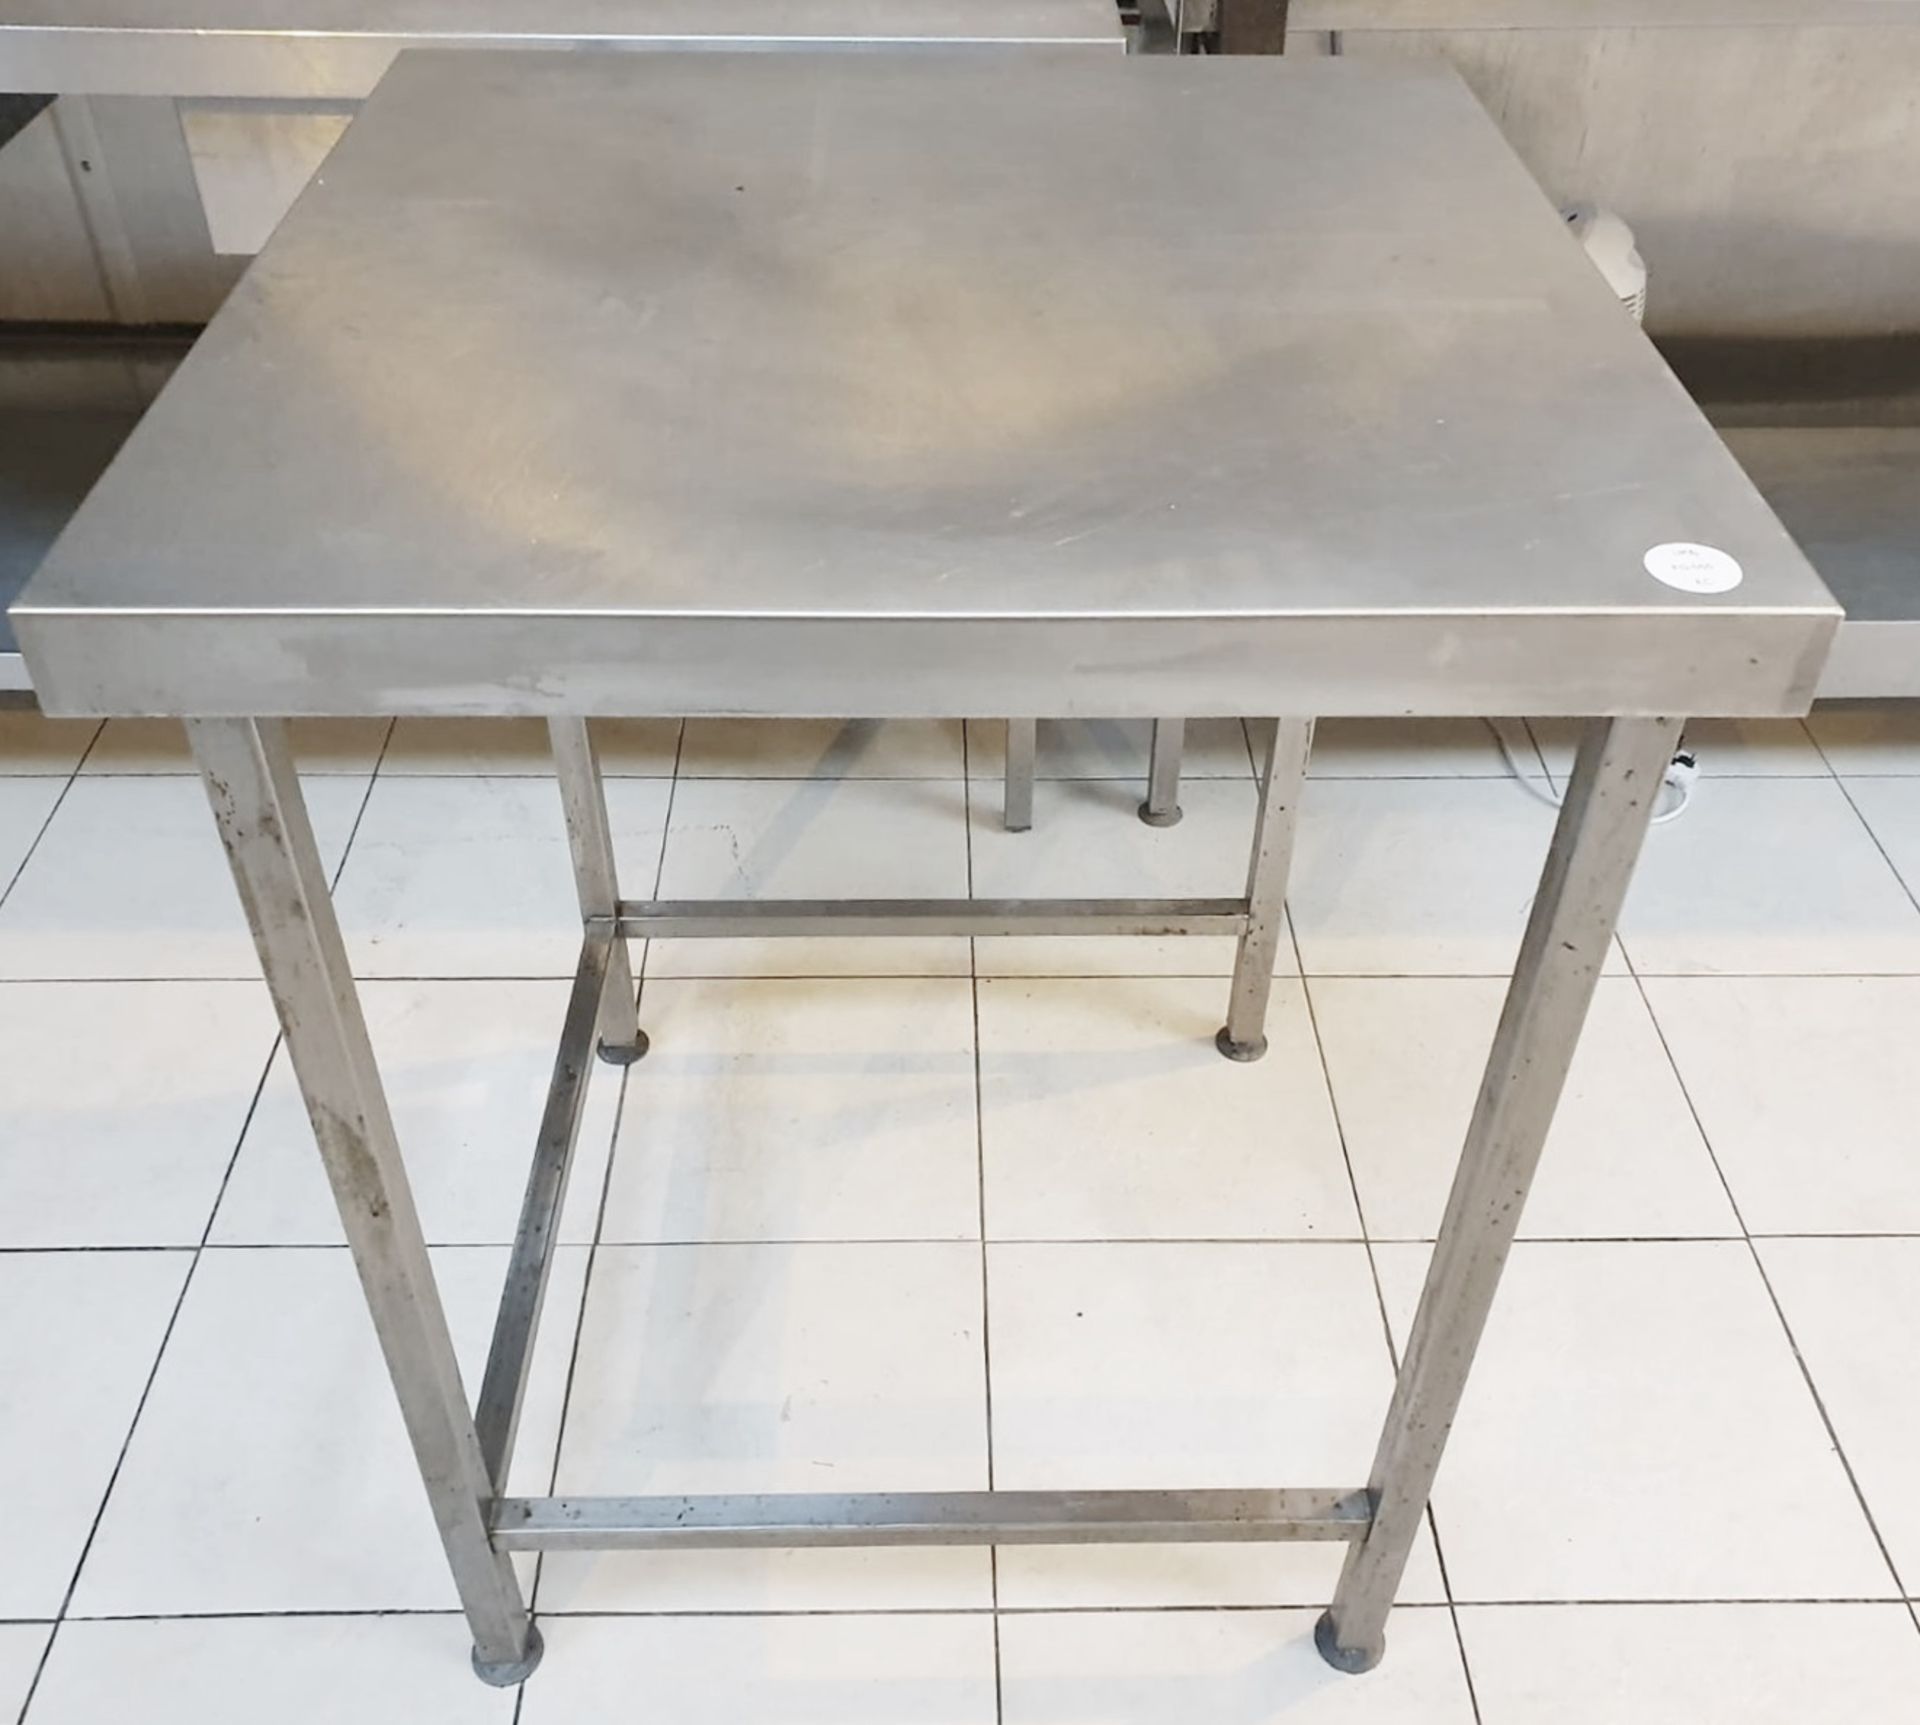 1 x Stainless Steel Square Prep Table - Dimensions: 70cm x 70 x h90cm **£5 Start - No Reserve**